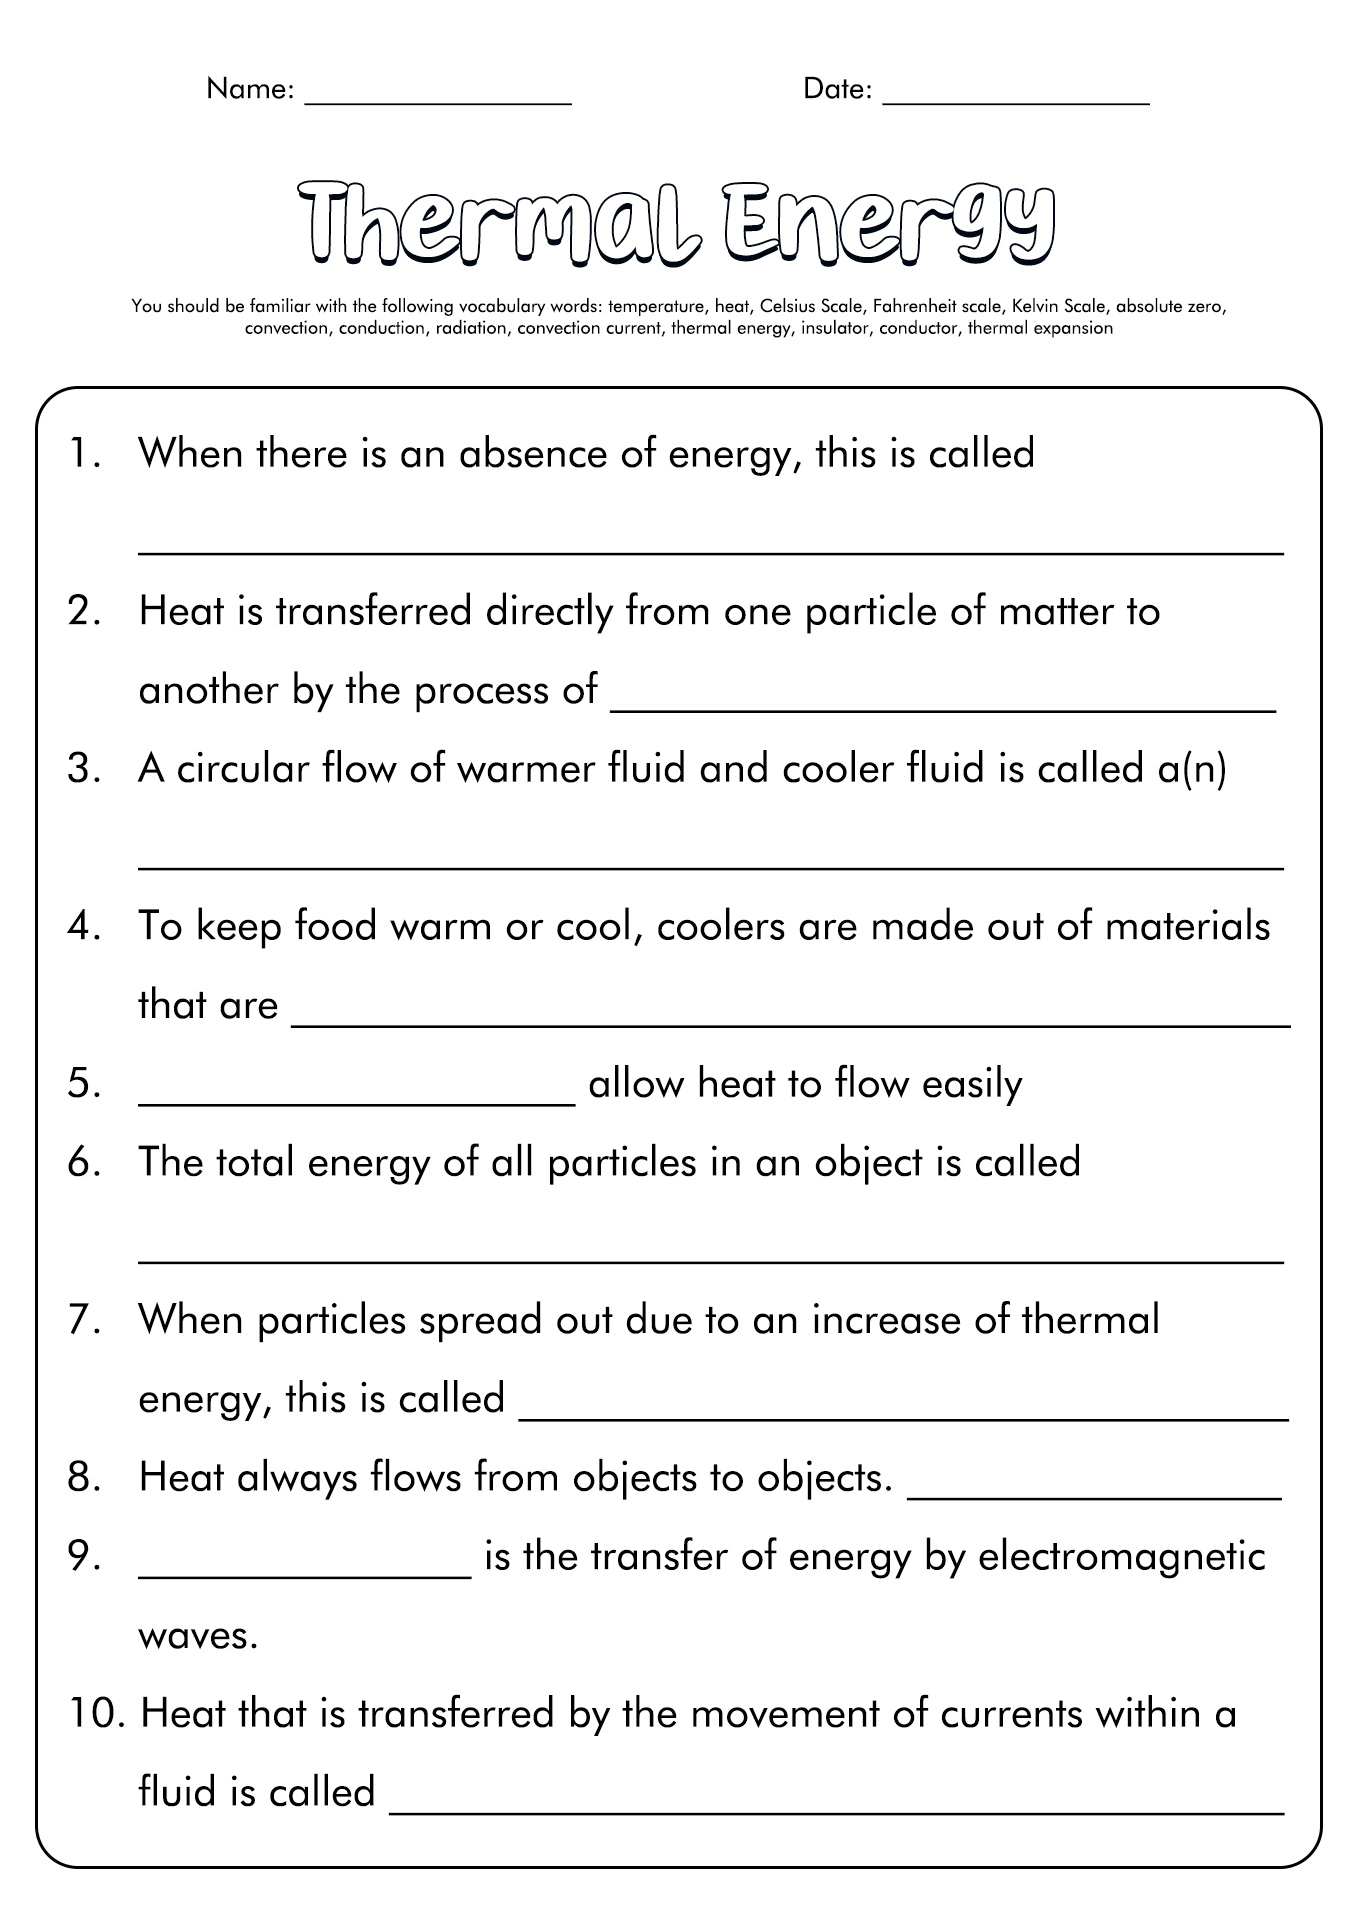 14 Energy Worksheets For Third Grade - Free Pdf At Worksheeto within Free Printable Heat Transfer Worksheets